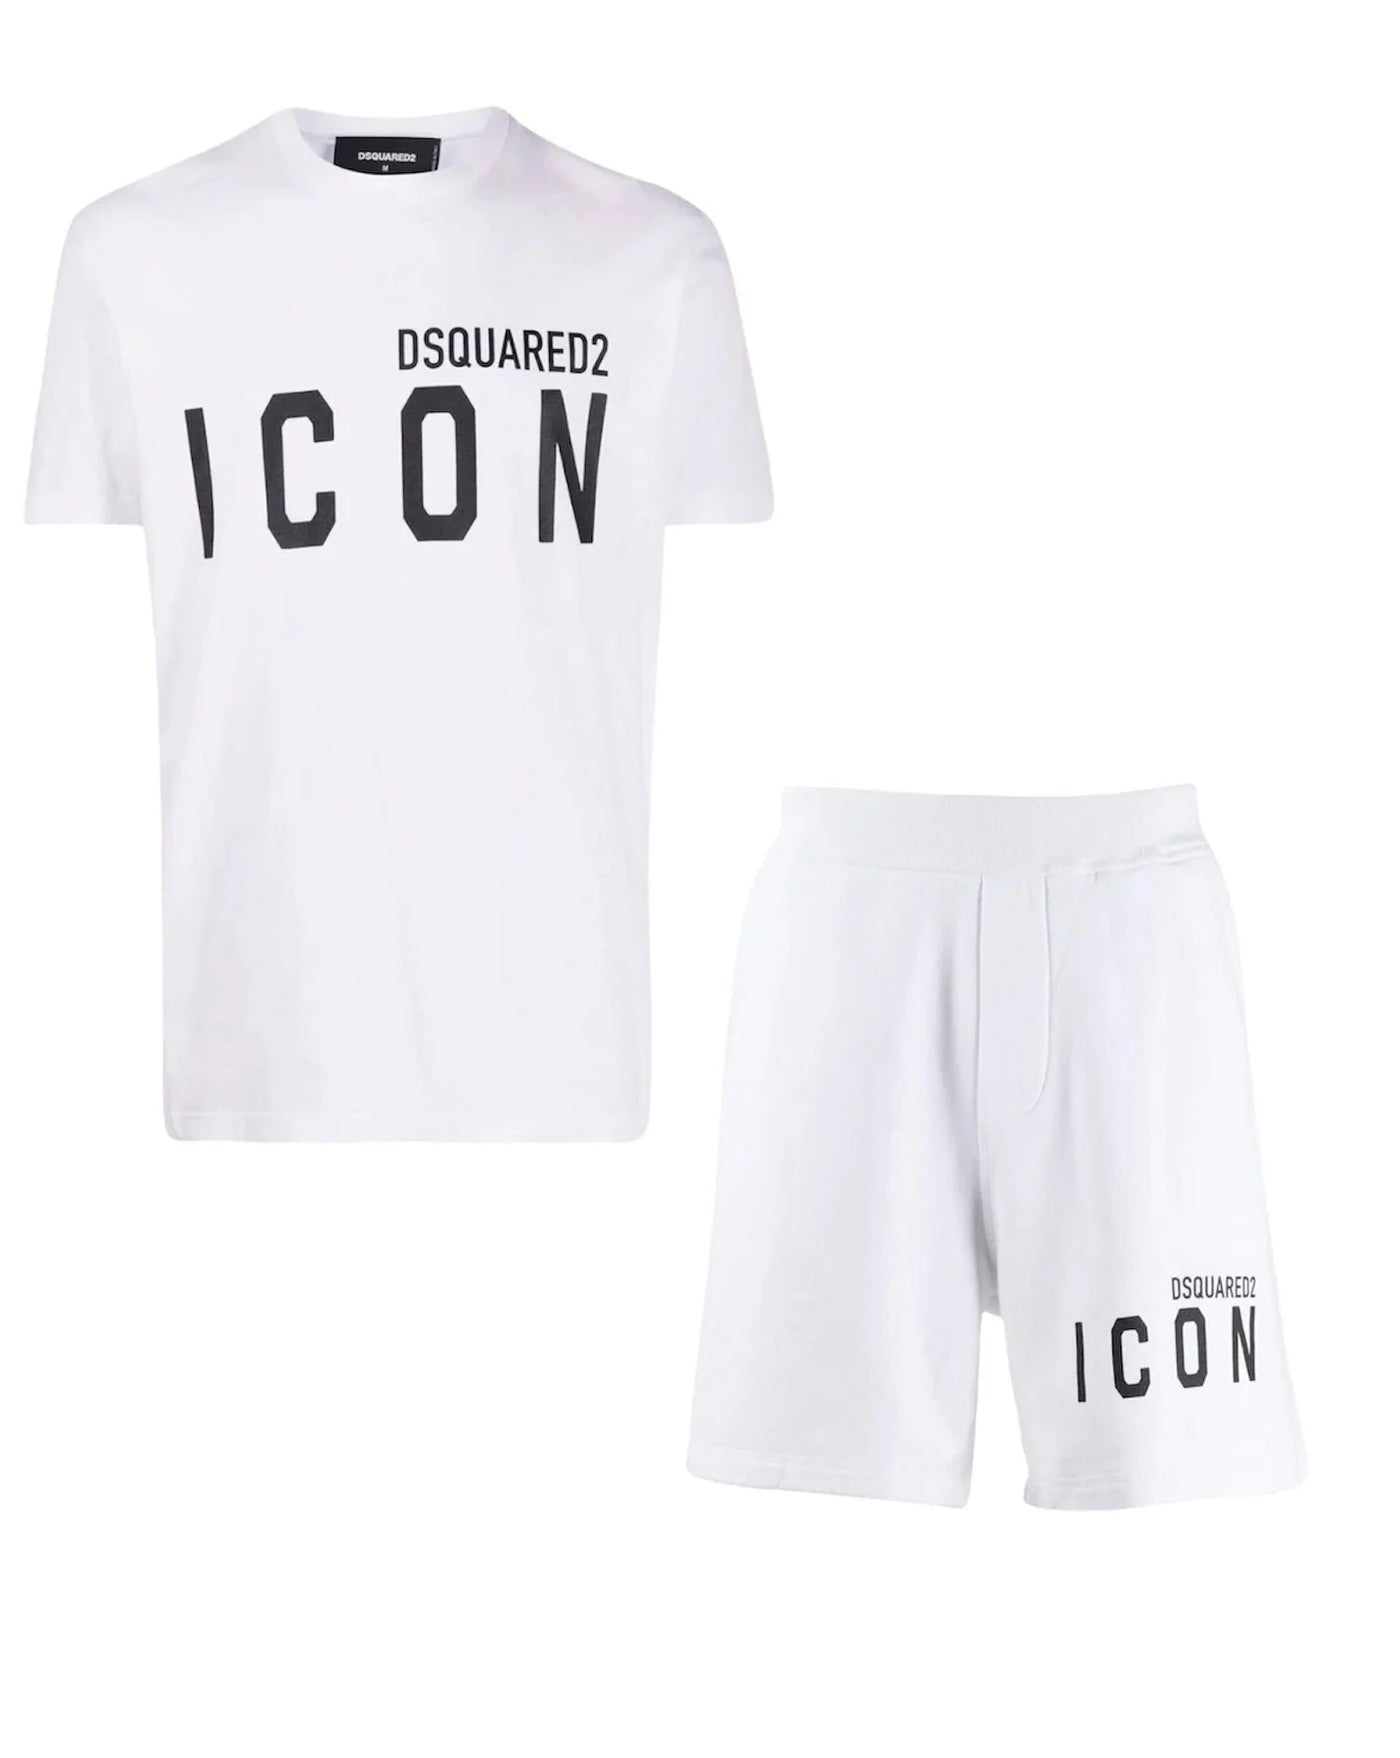 Dsquared2 Icon T-Shirt & Shorts Set in White